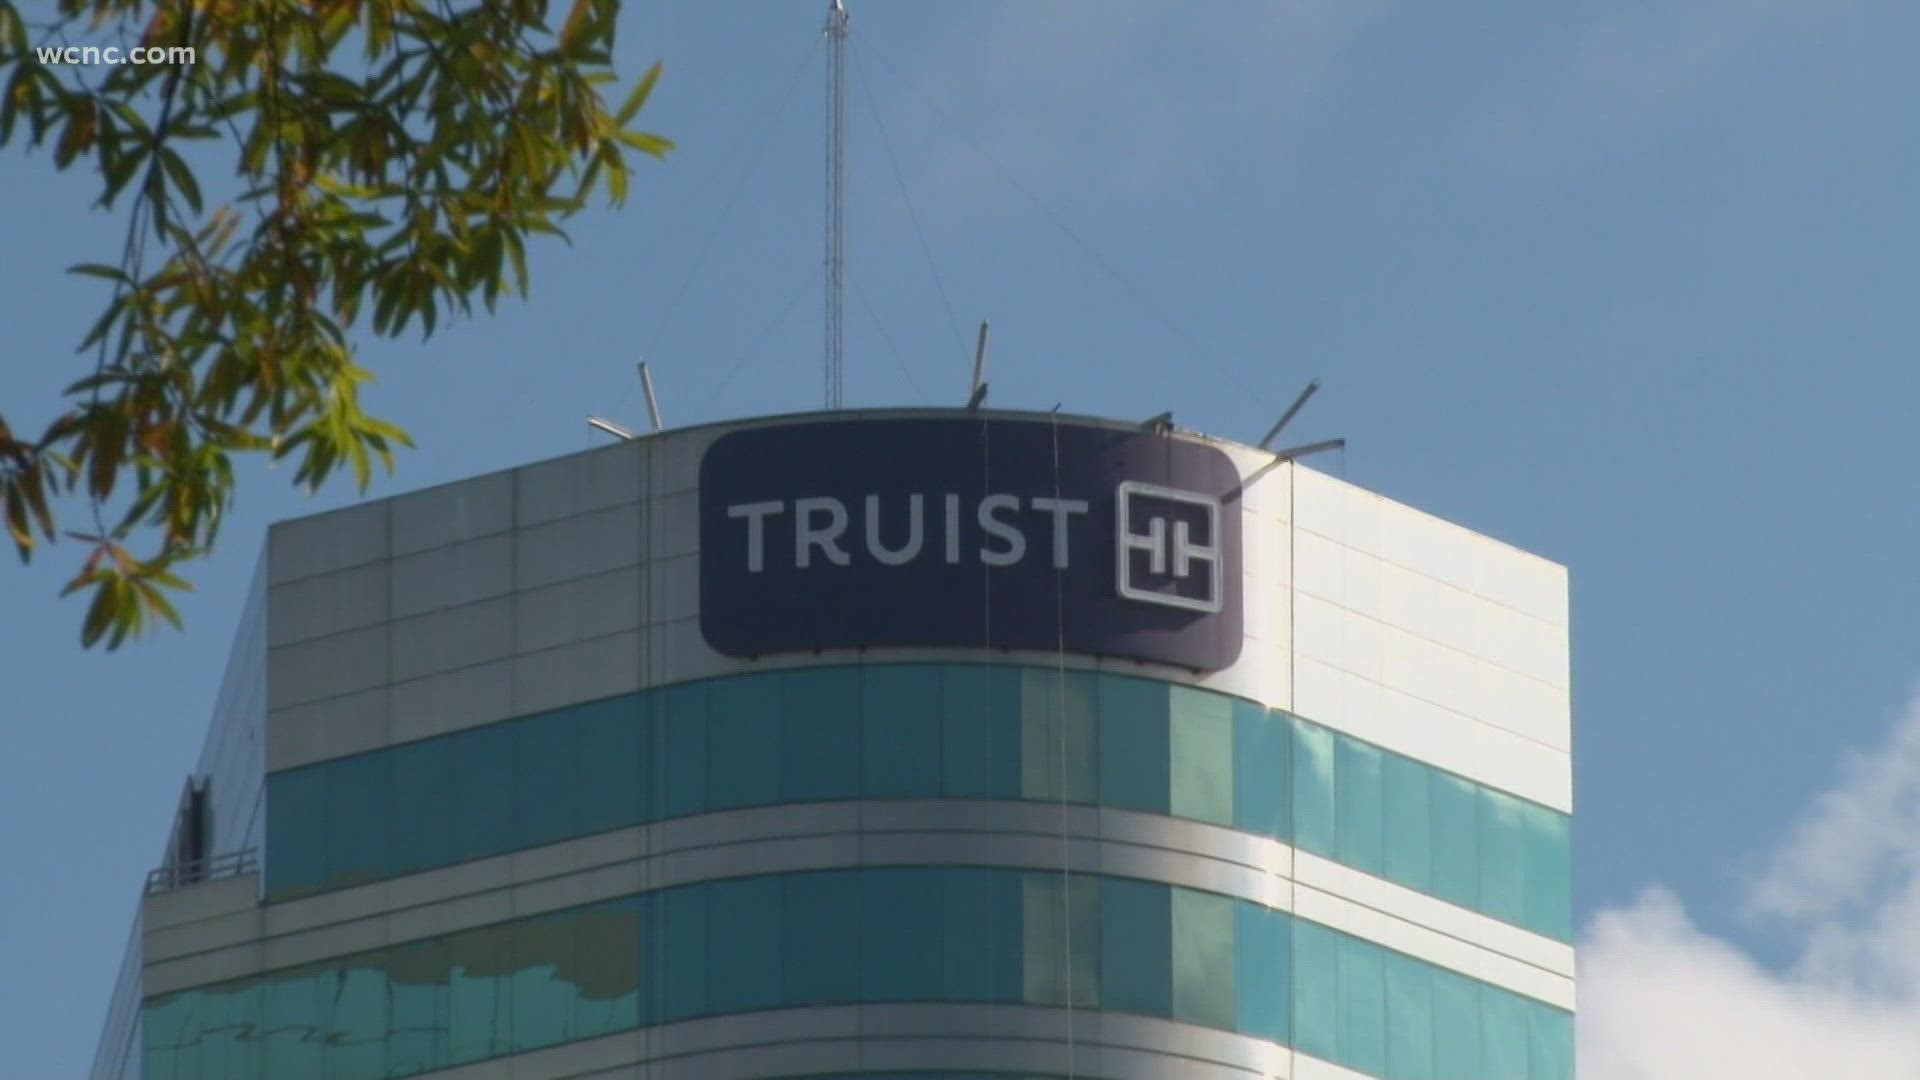 Several weeks after Truist Bank's merger and Tracie and Mark Lovelace still spend hours on the phone, tracking down information about their past SunTrust accounts.